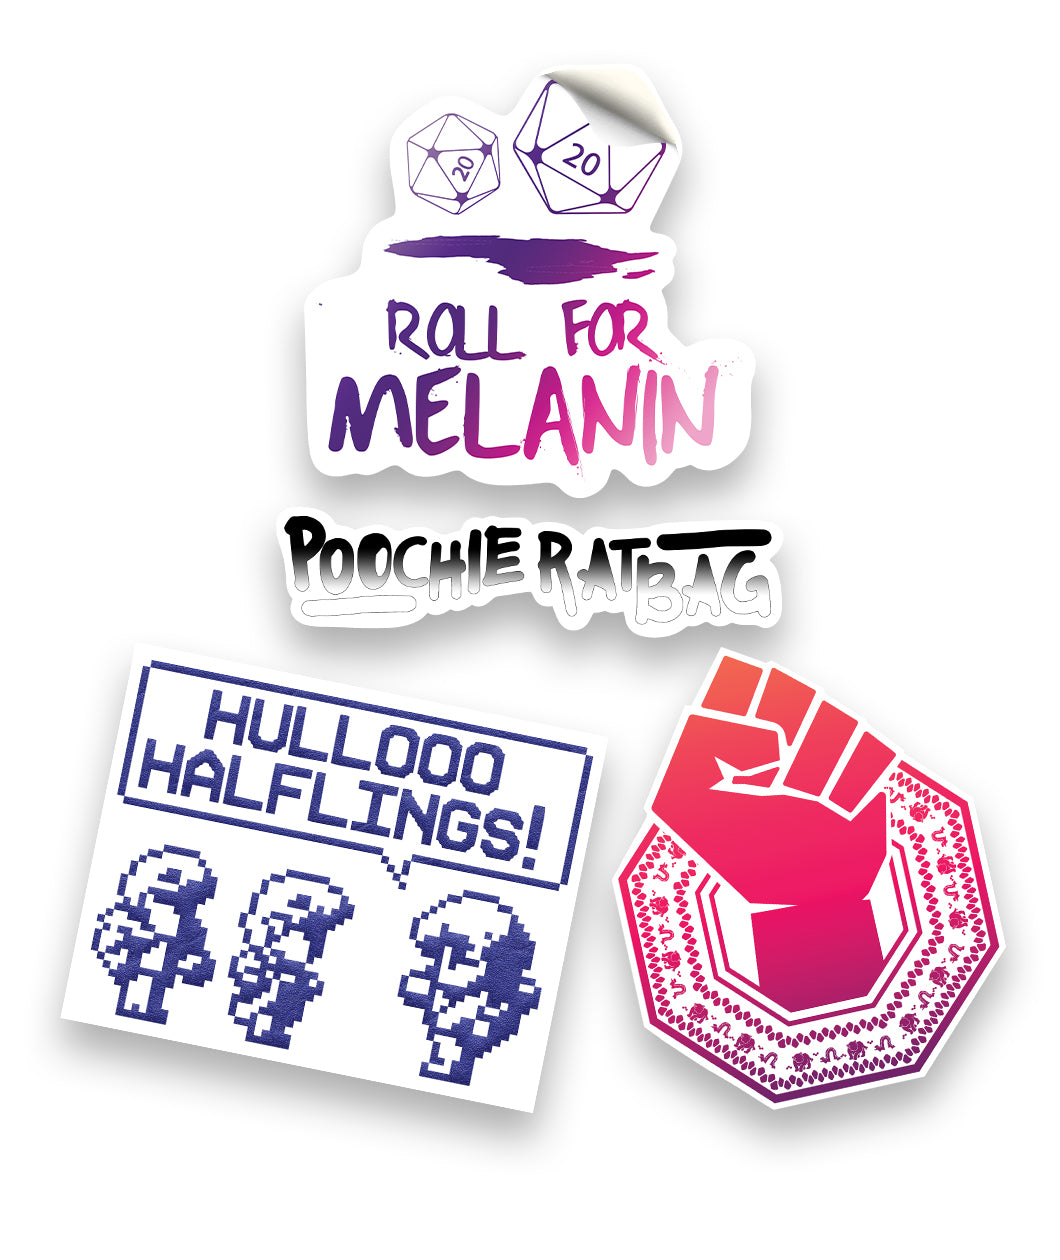 A sticker pack from Three Black Halfings. There are four stickers. One has two dice, each showing a 20 and the text 